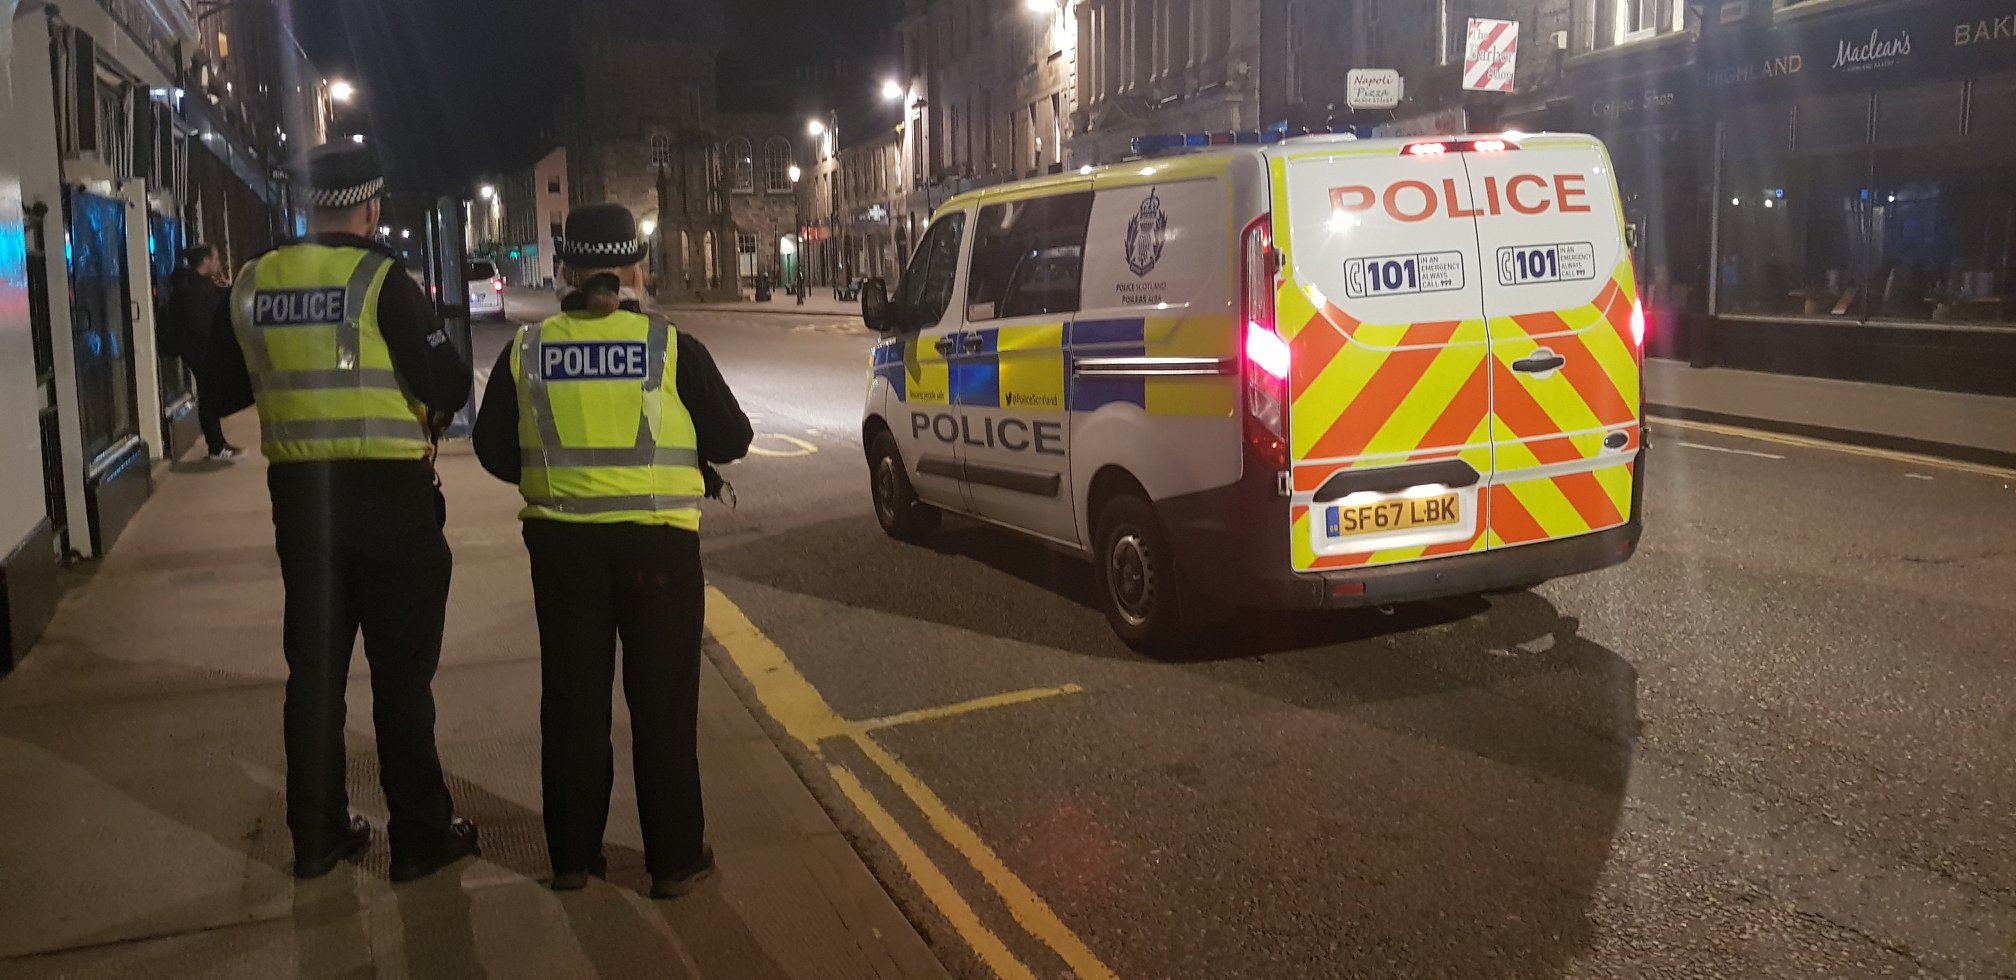 Police on patrol on Forres High Street.